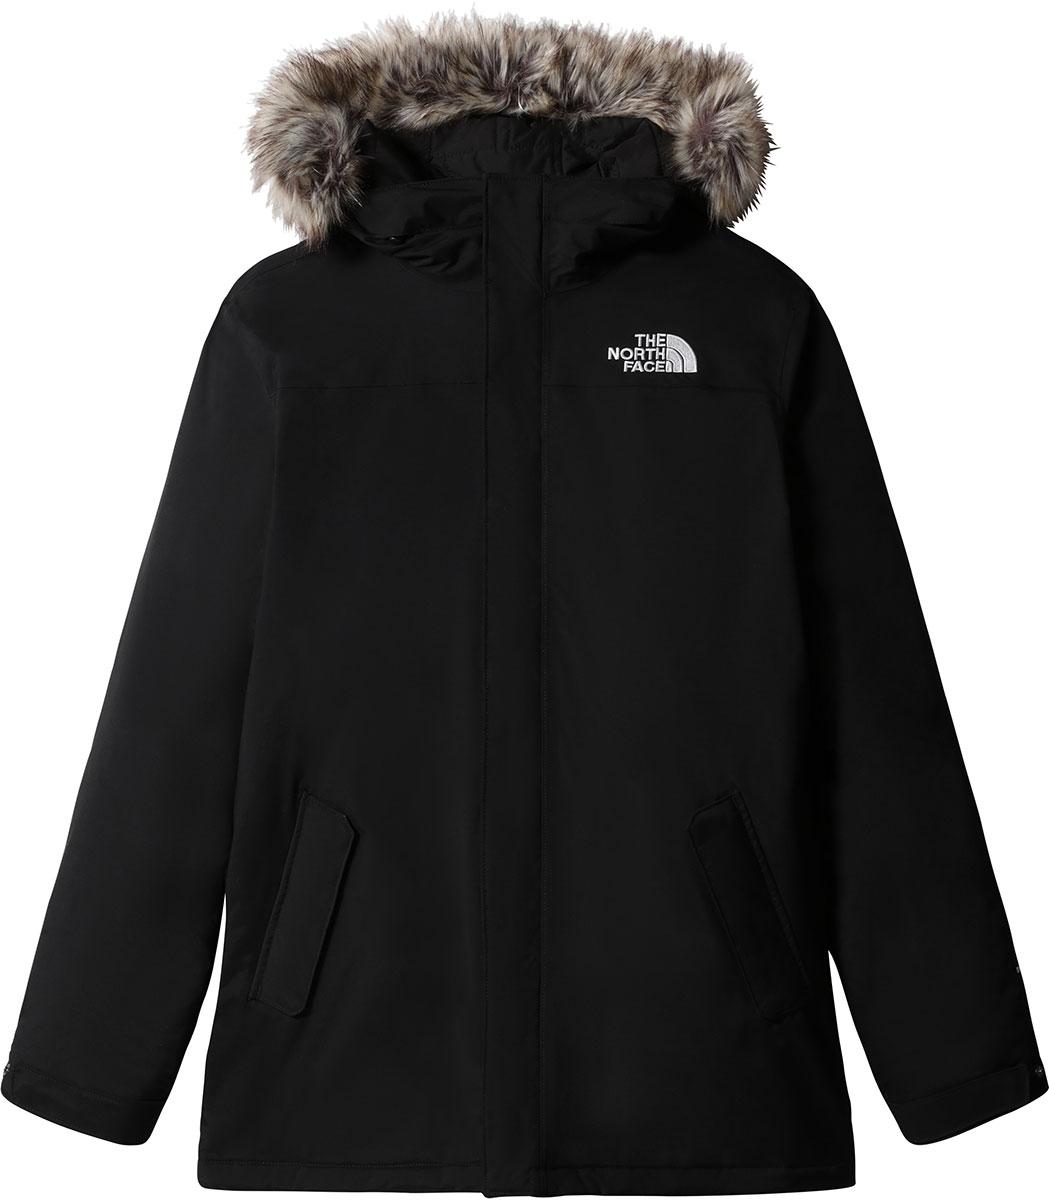 The North Face Zaneck Insulated Jacket - Tnf Black